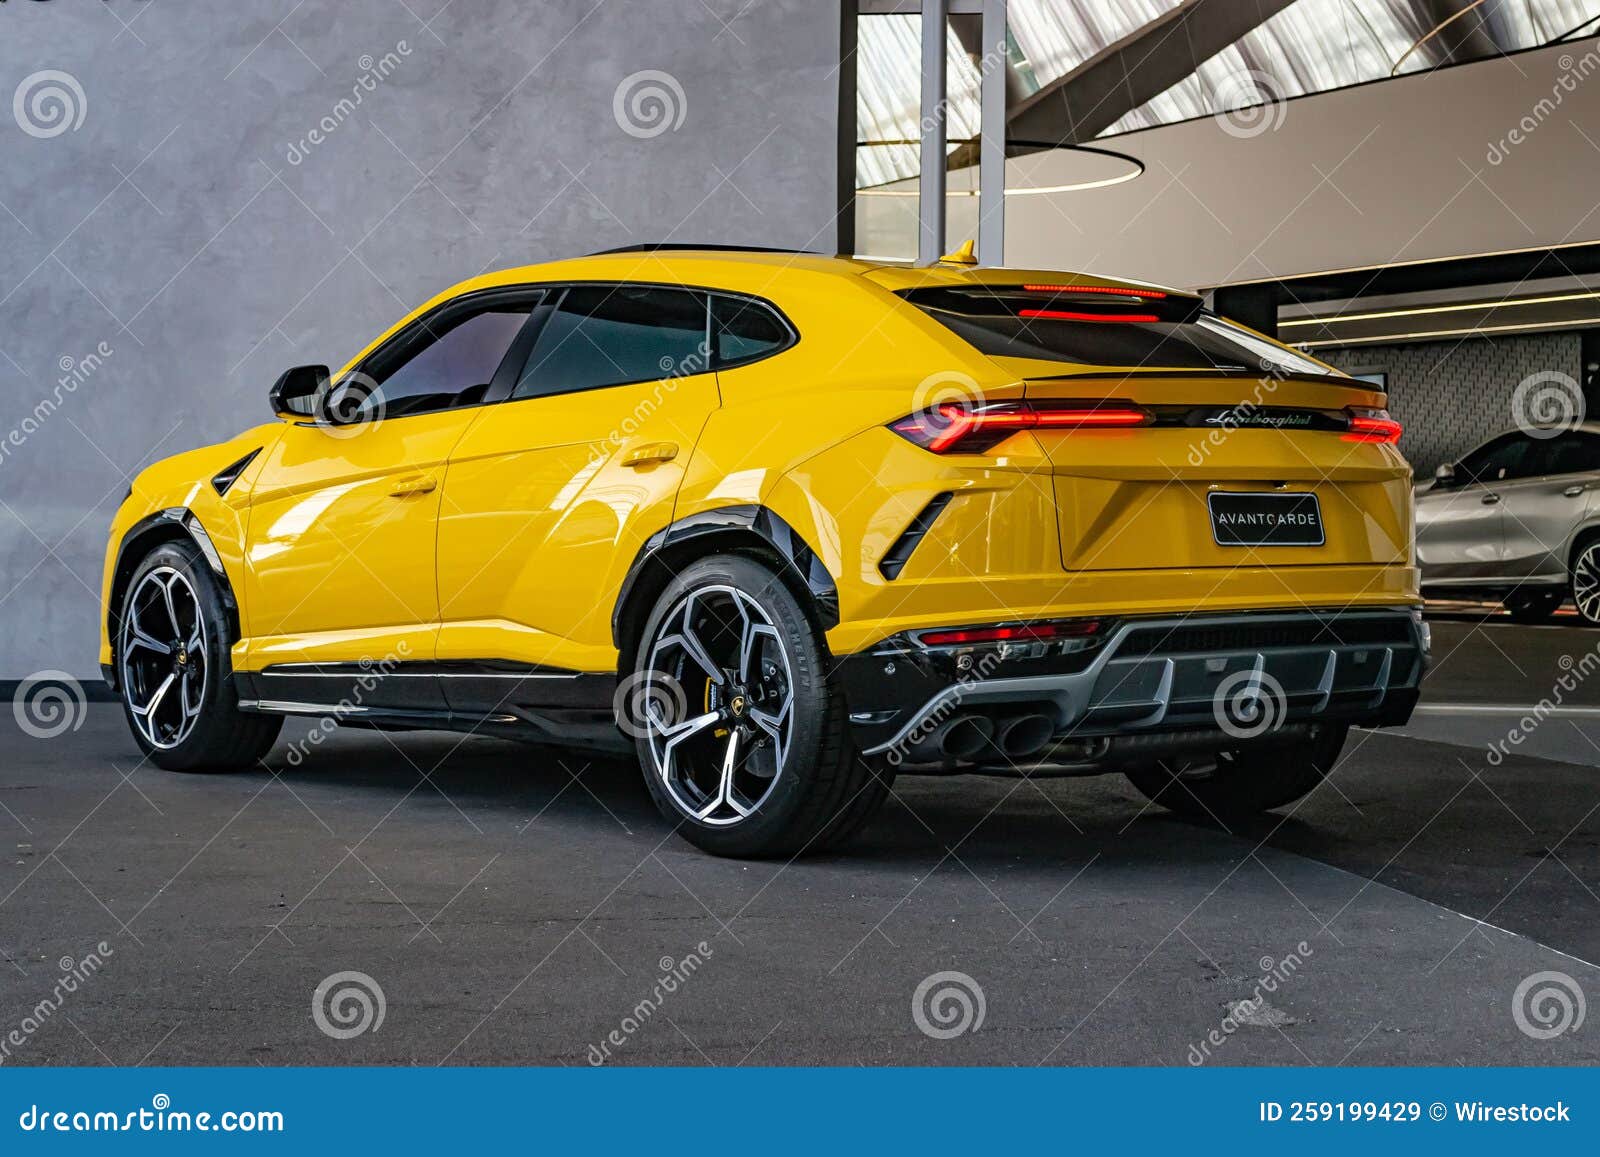 Urus Stock Photos and Images - 123RF